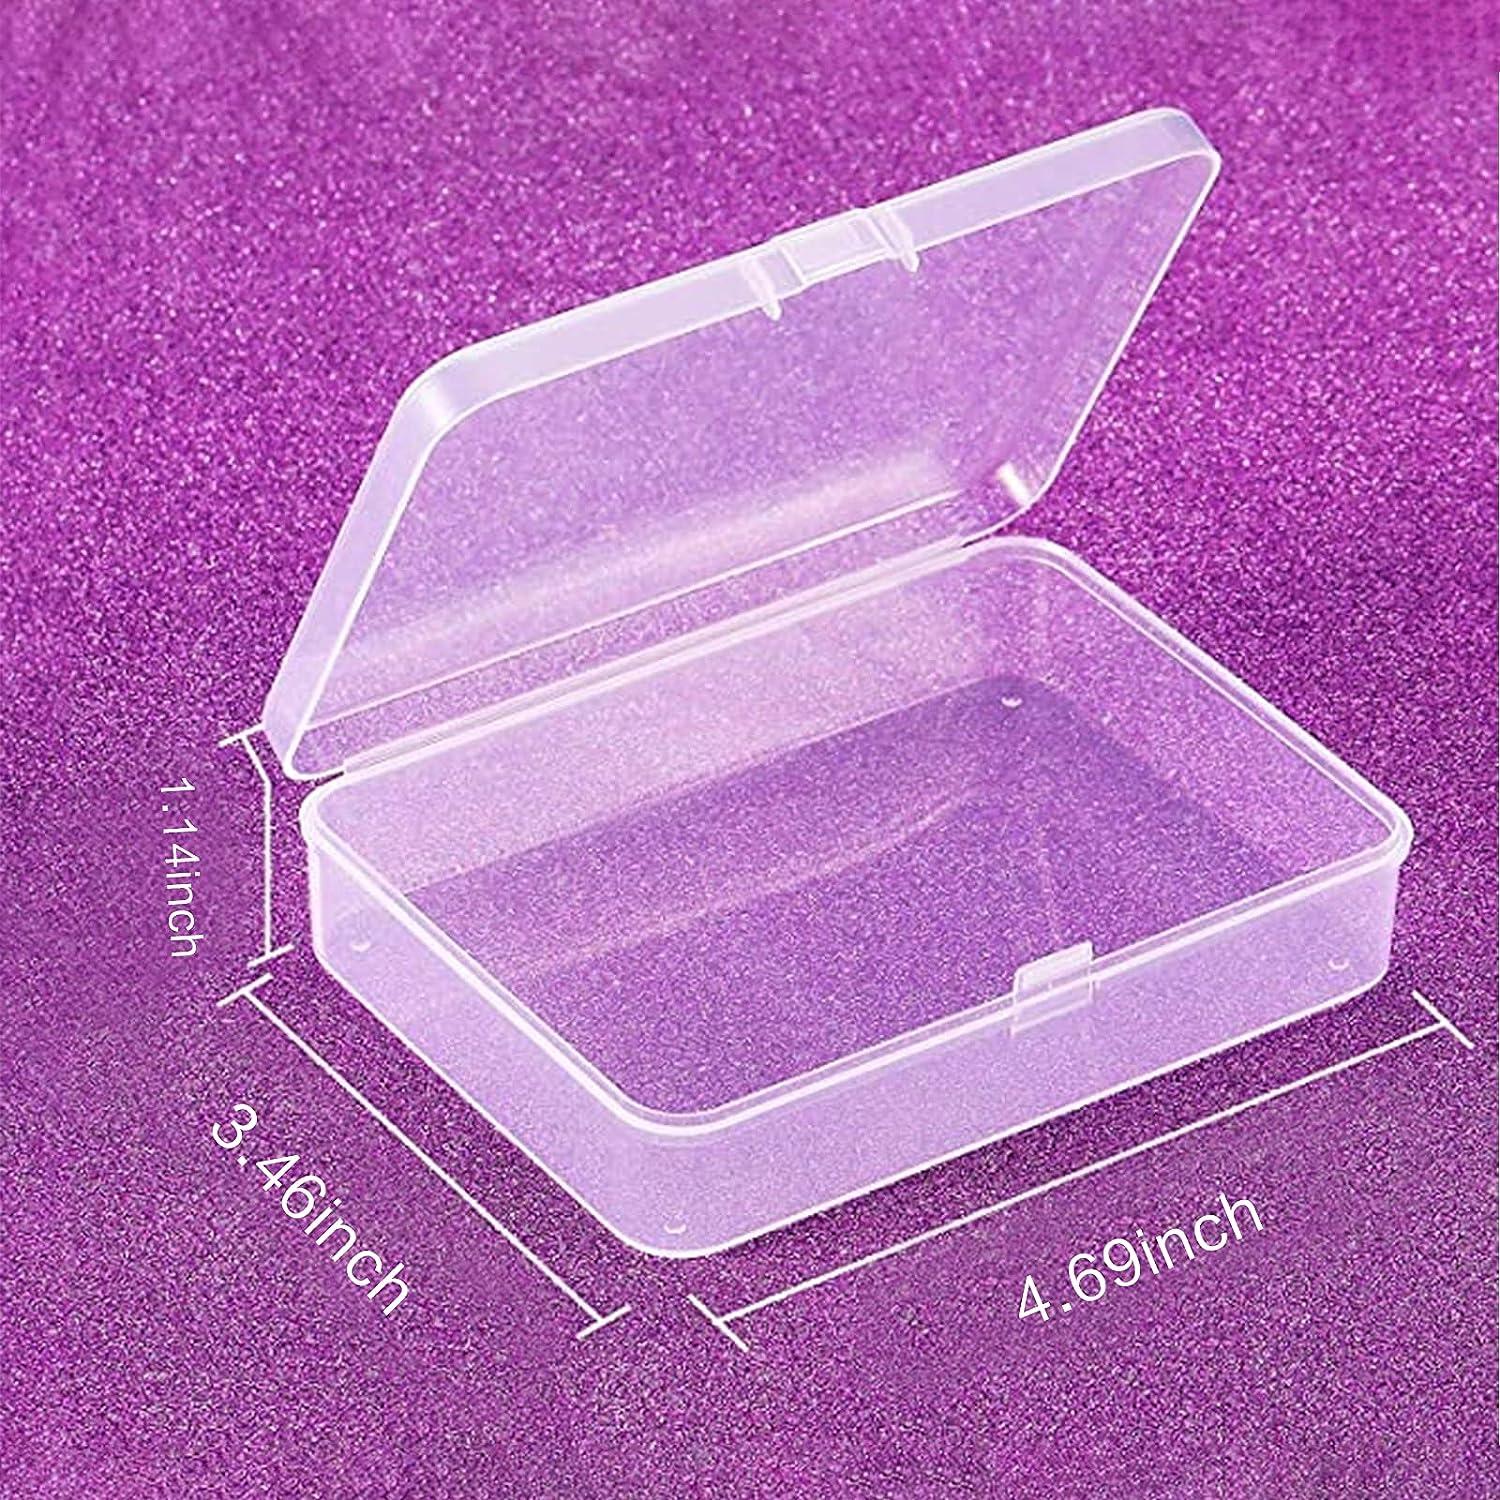 ZUER 2 Pcs Clear Plastic Beads Storage Containers Box Large PP Clear  Plastic Beads Storage Containers Box with Hinged Lid Use for Holding Small  Jewelry